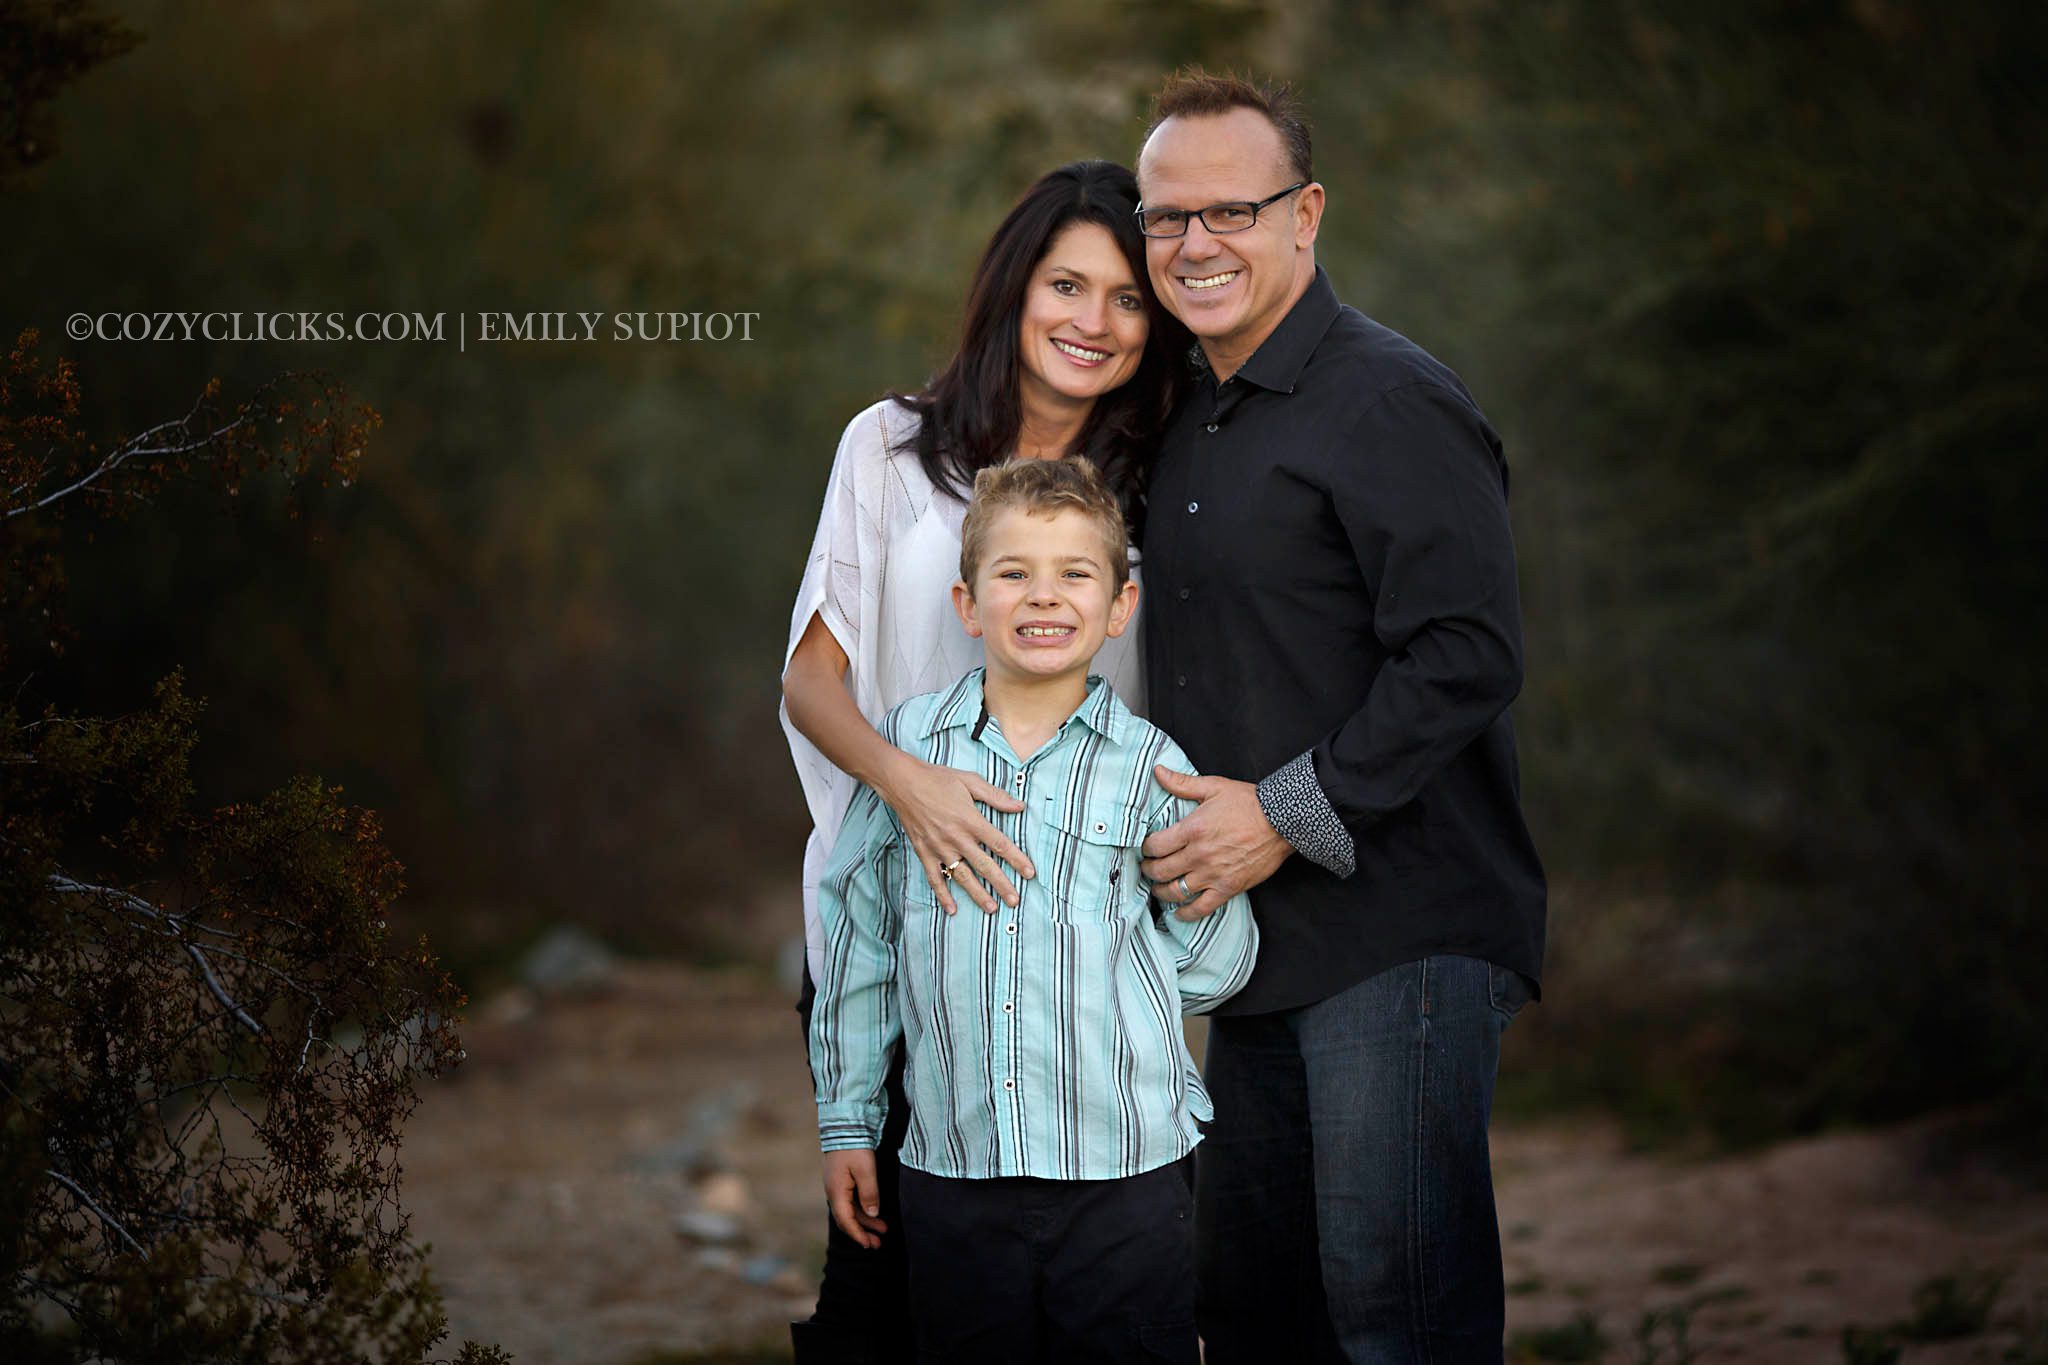 Family photographer in Phoneix and surrounding areas